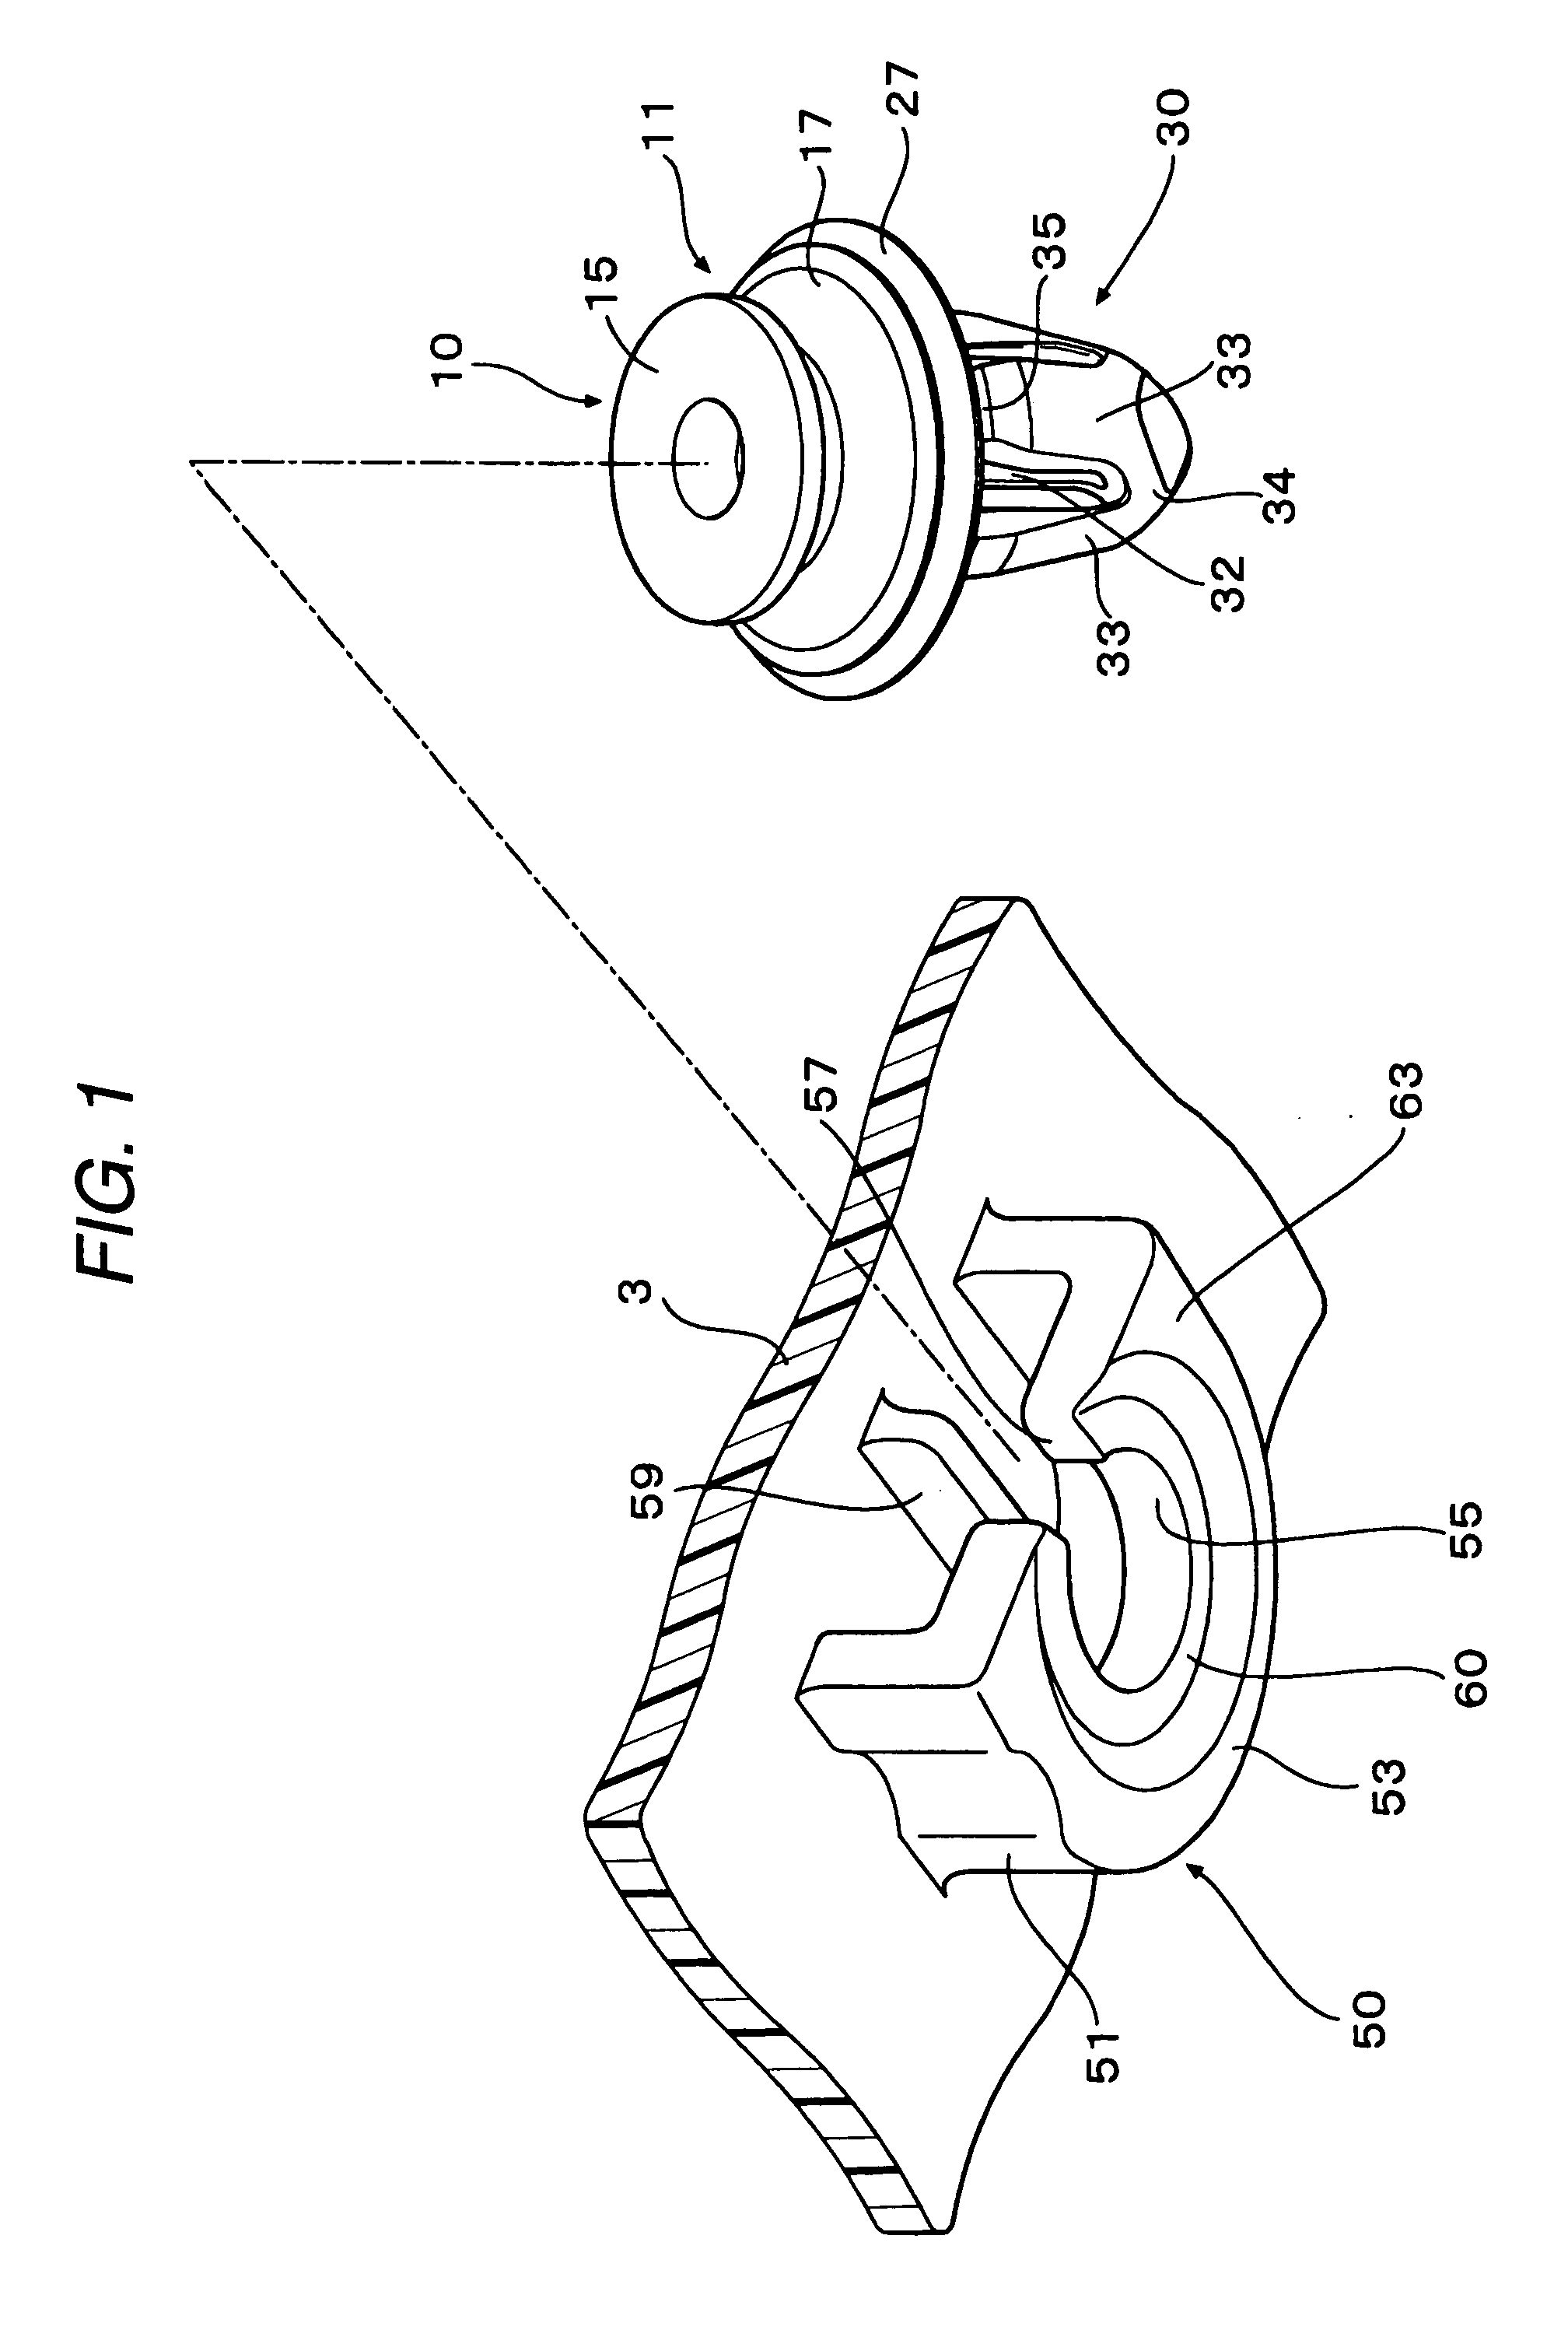 Assembling structure of clip and mounting member